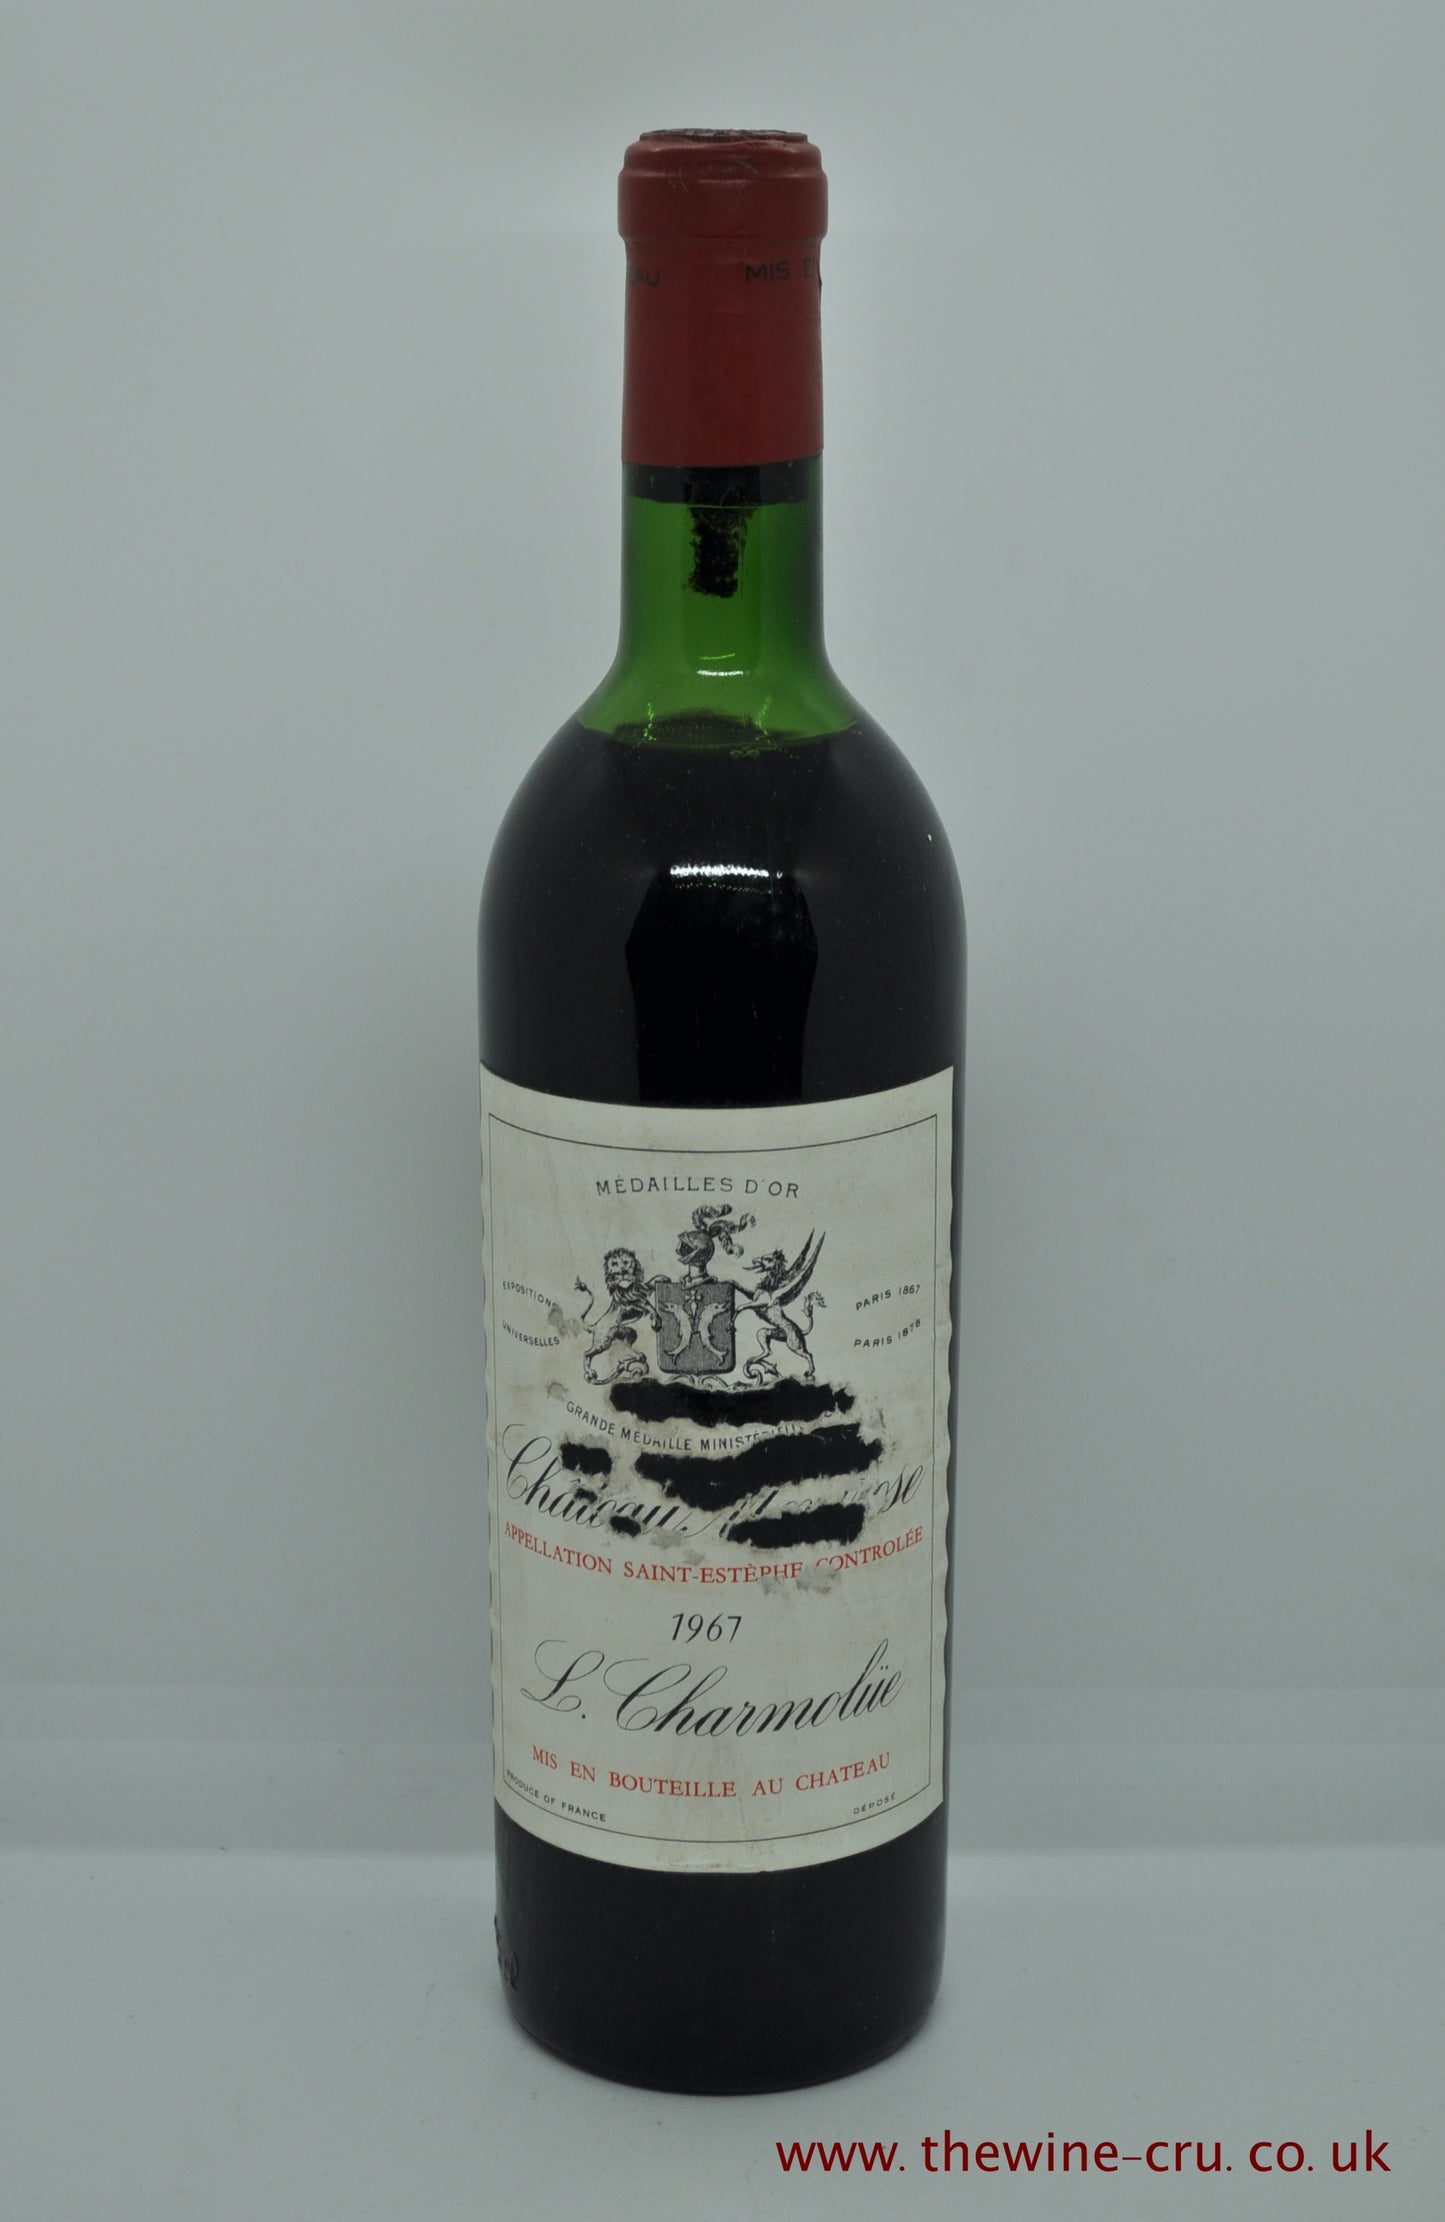 A bottle of 1967 Chateau Montrose, Saint-Estephe, Bordeaux, France. Capsule good the label has some parts in the middle missing. The vintage is clear. Immediate delivery. Free local delivery. Gift wrapping available.